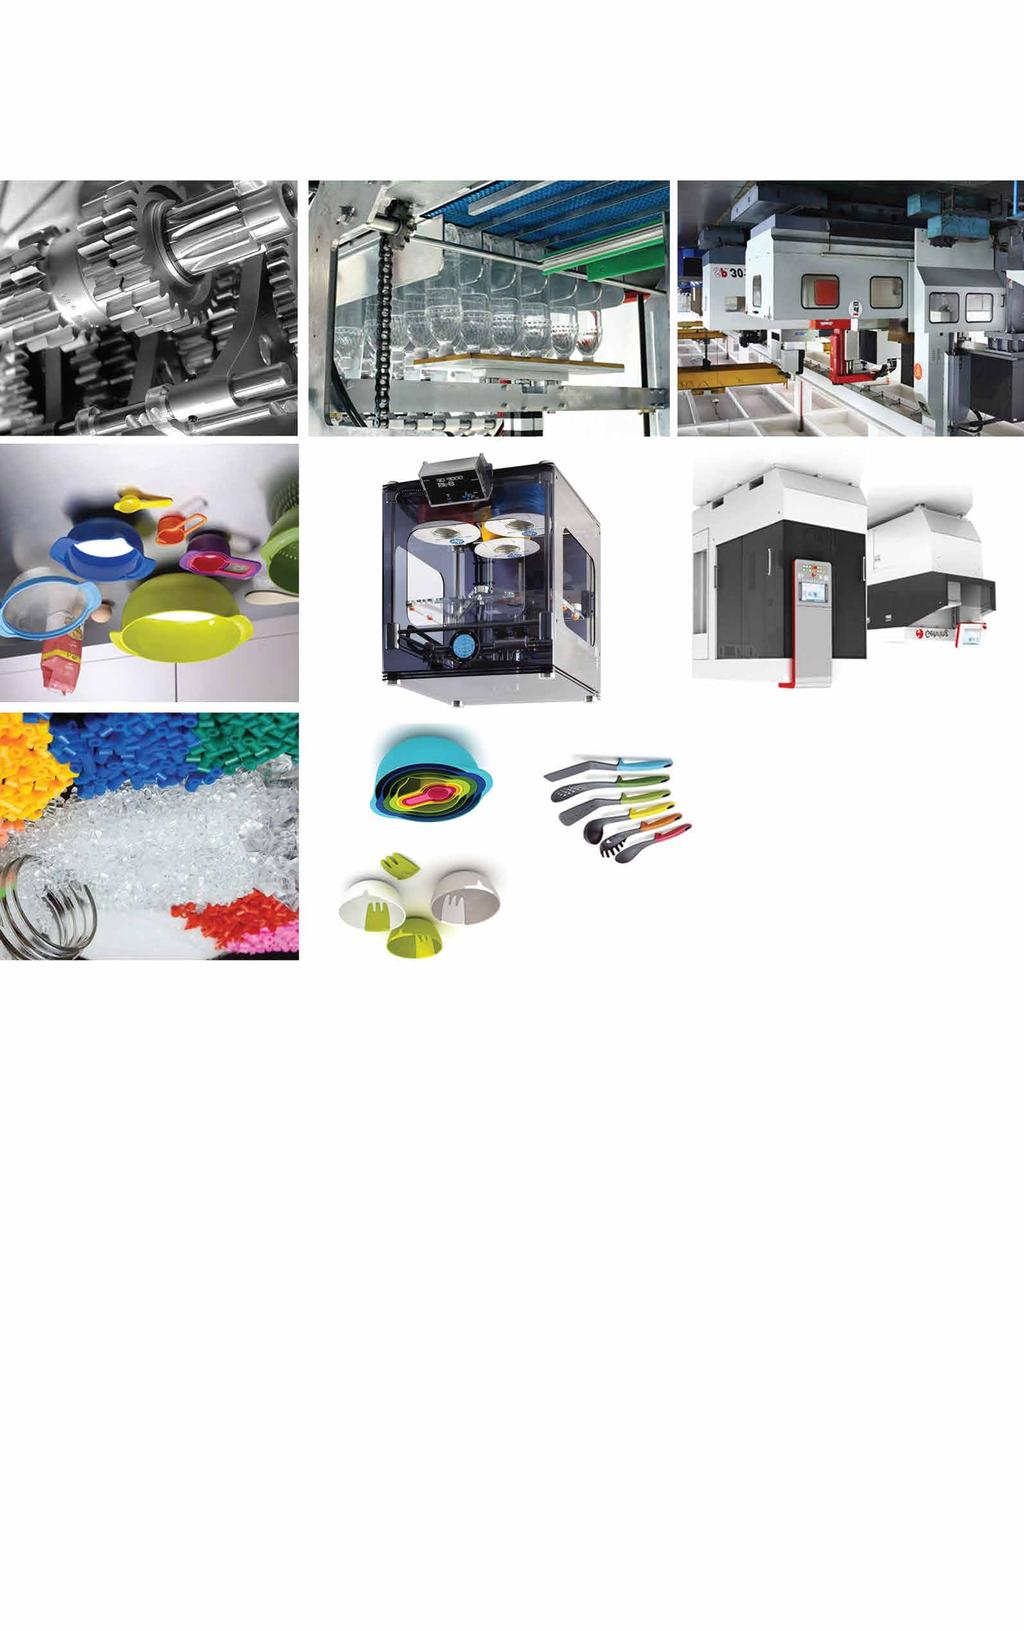 PLASTIC EXPO 04 Plastic Expo is the preferred place for the leading raw material producers, semi-finished product suppliers and machinery manufacturers to offer an overview of the latest technical